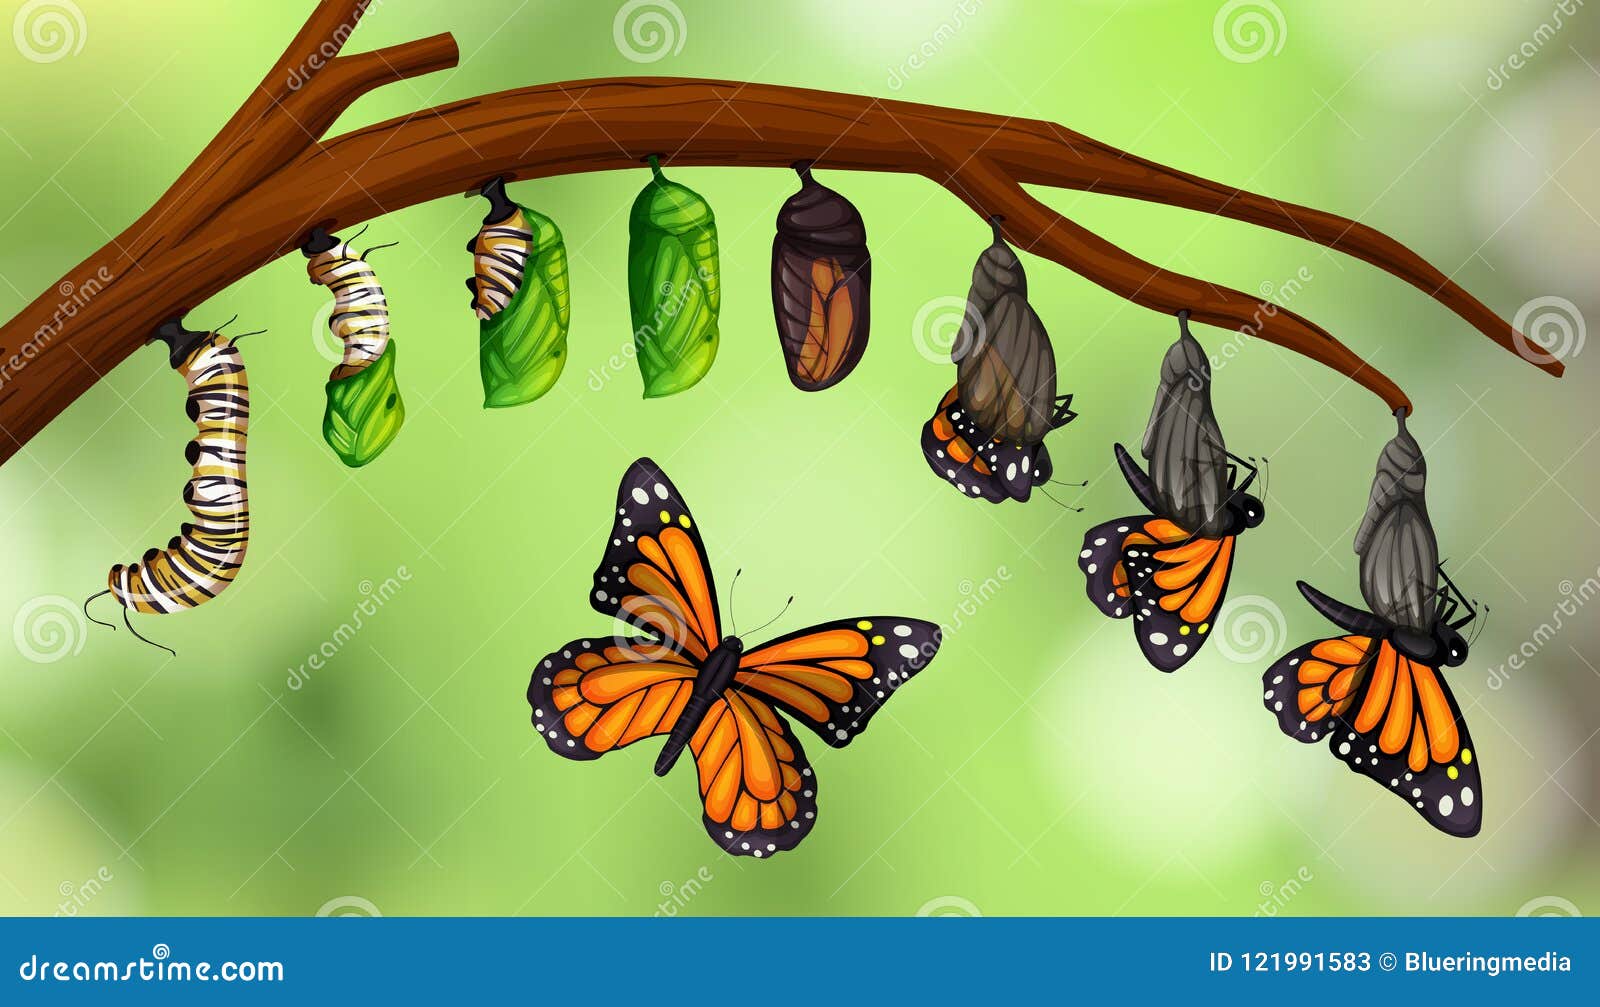 udl life cycle of a butterfly example